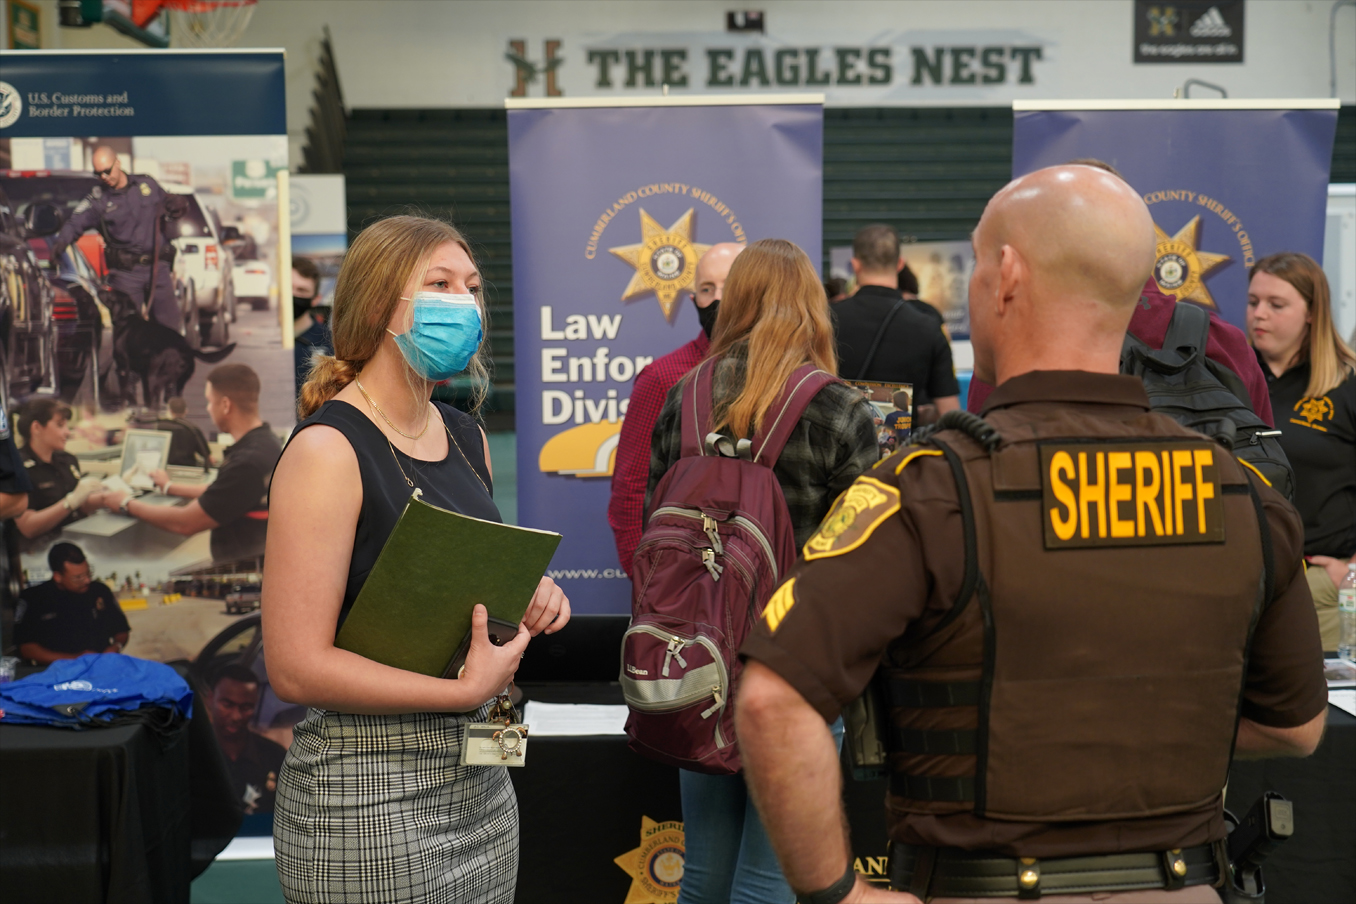 A student attends the Legal Studies Career fair on campus of Husson University